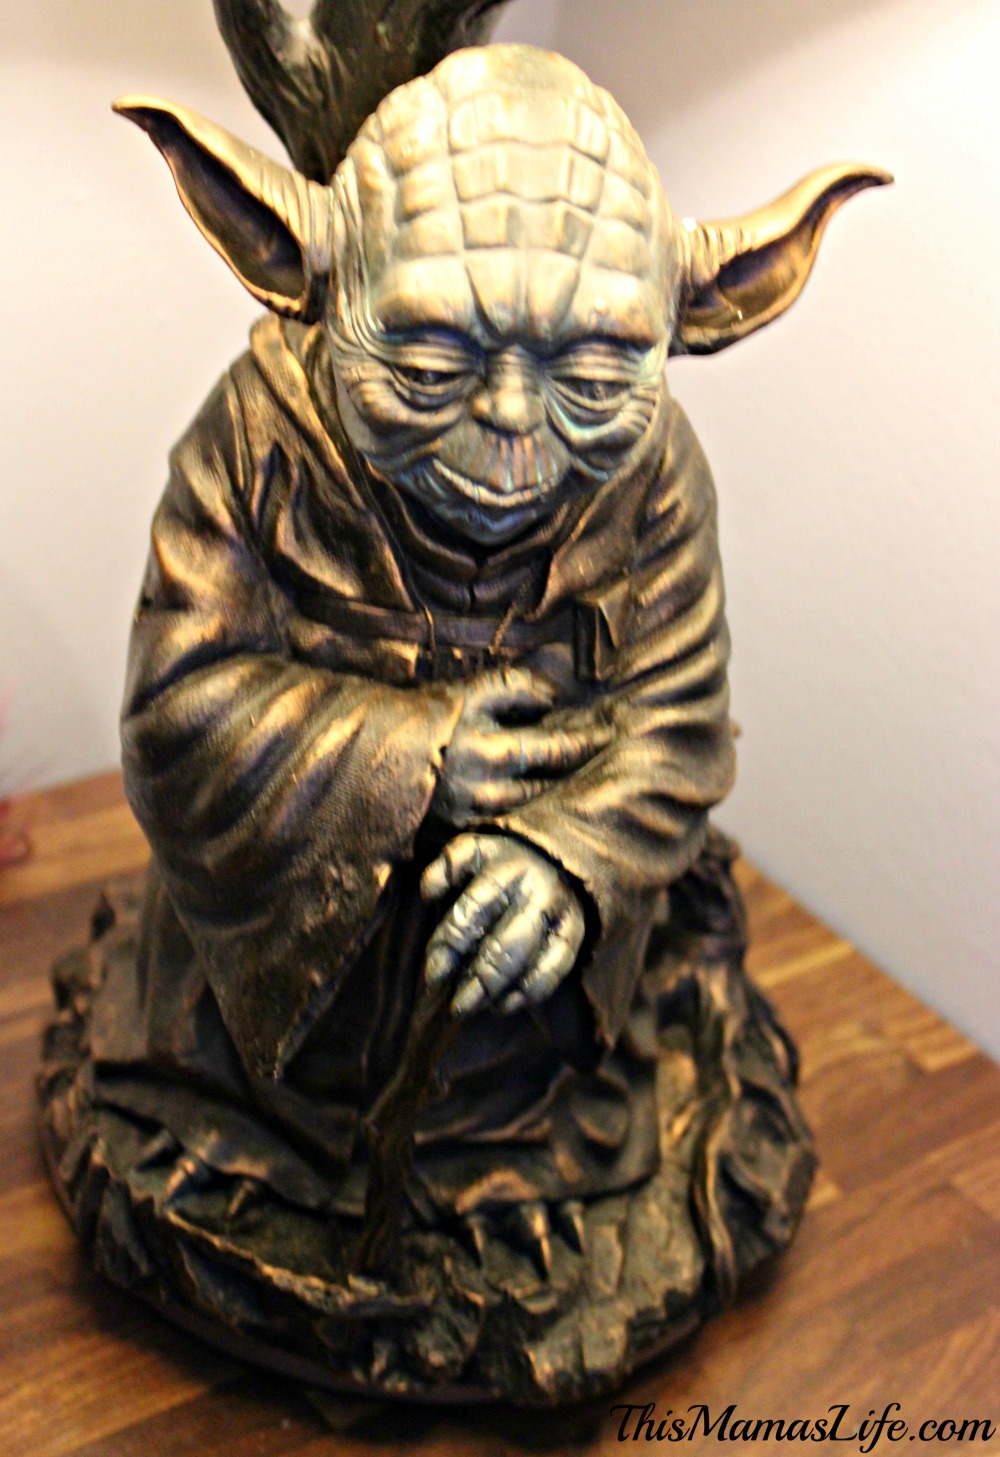 Light Up Your Home With The Bradford, The Yoda Table Lamp